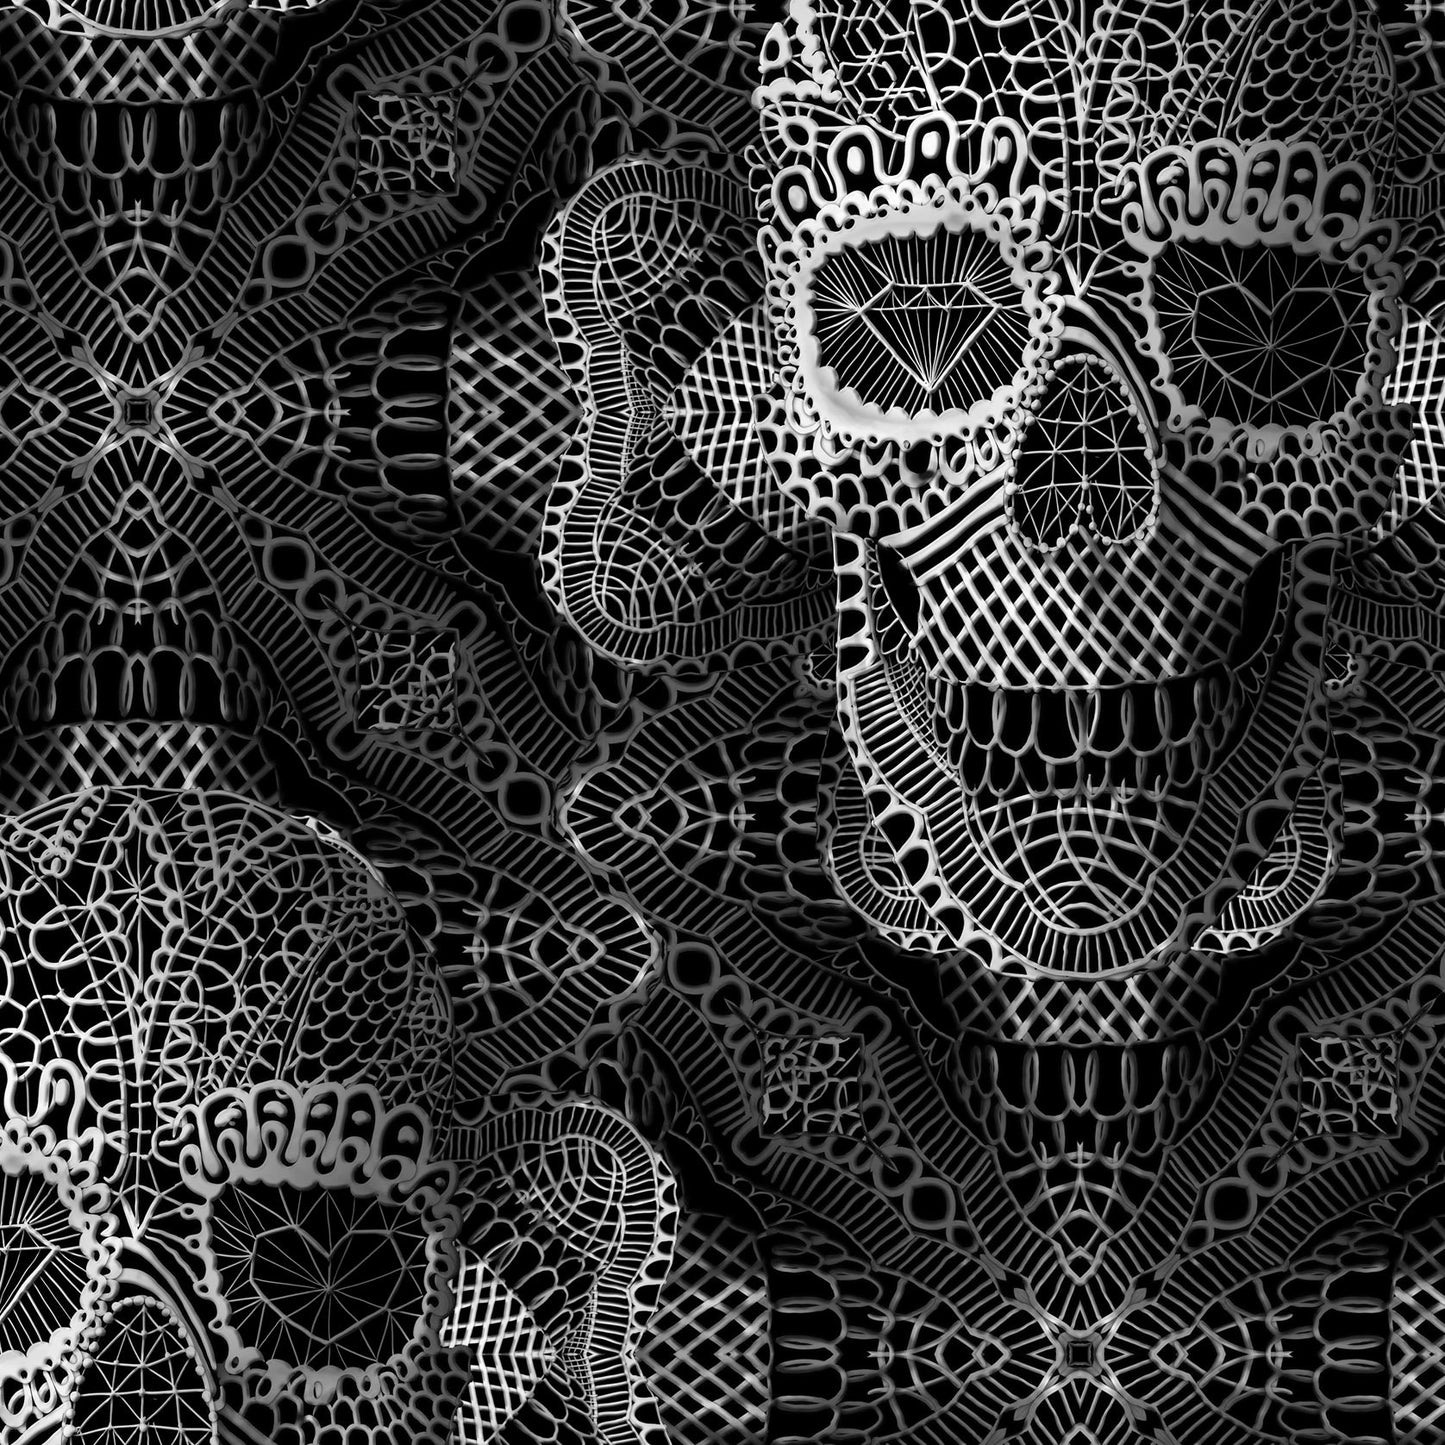 Gothic Wallpaper Home Decor, Sugar Skull Art Print Traditional Wallpaper Gift, Lace Pattern Black And White Floral Wallpaper